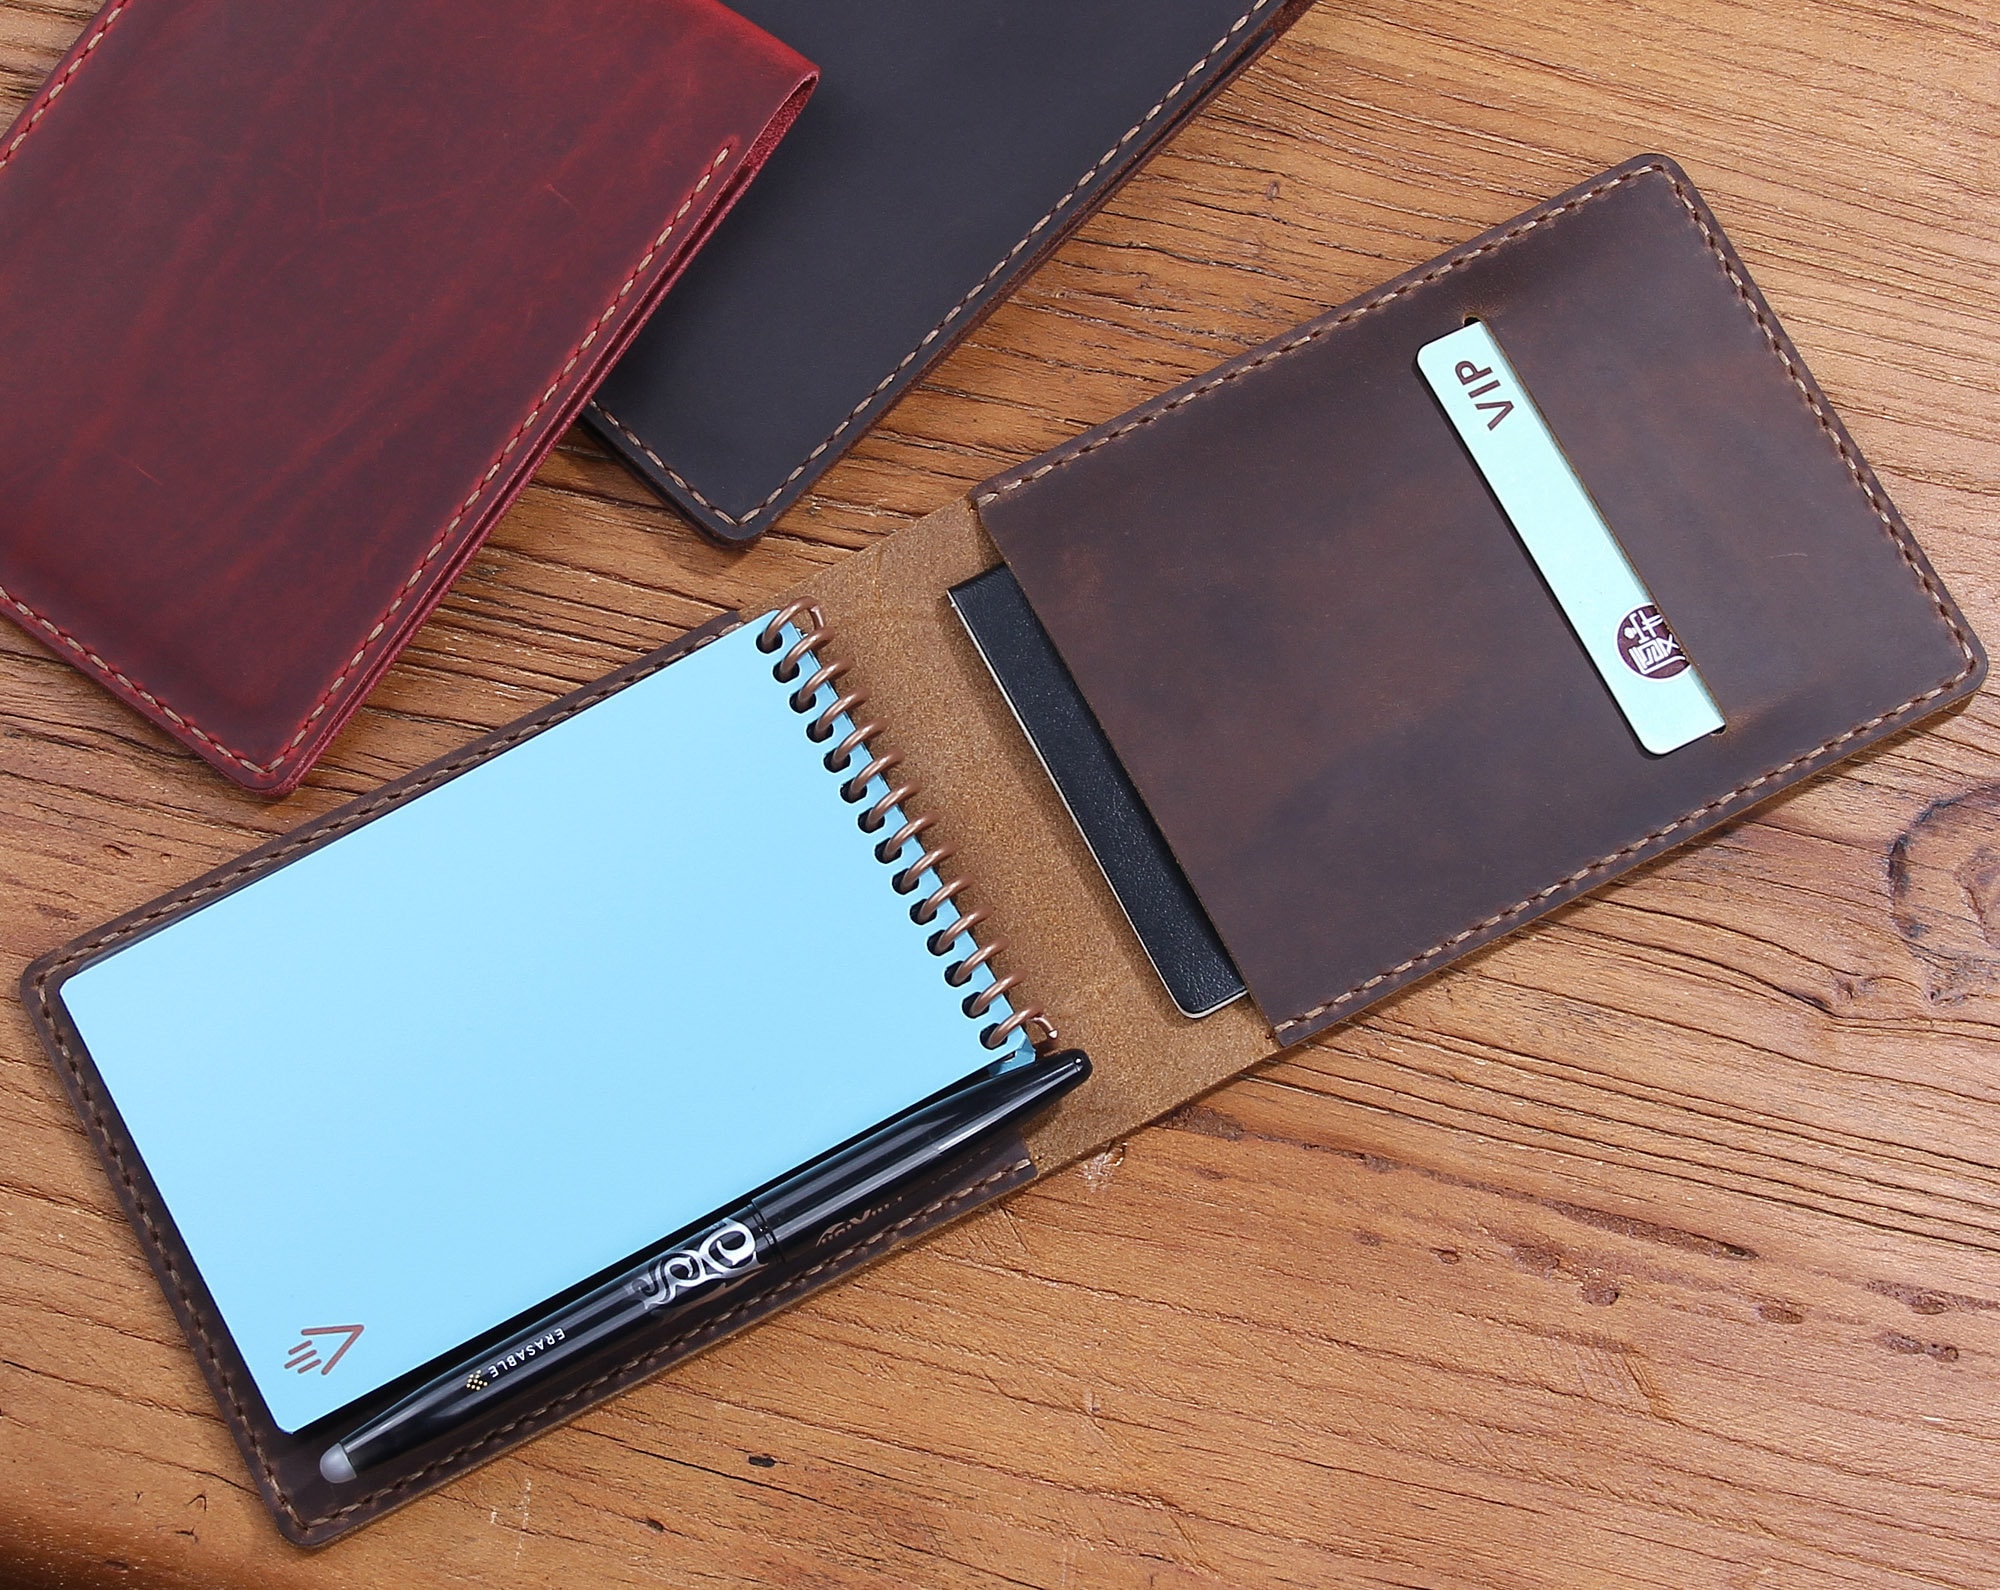 Leather Notebook Covers & Holders - Planners / Pads / Diaries - Galen  Leather